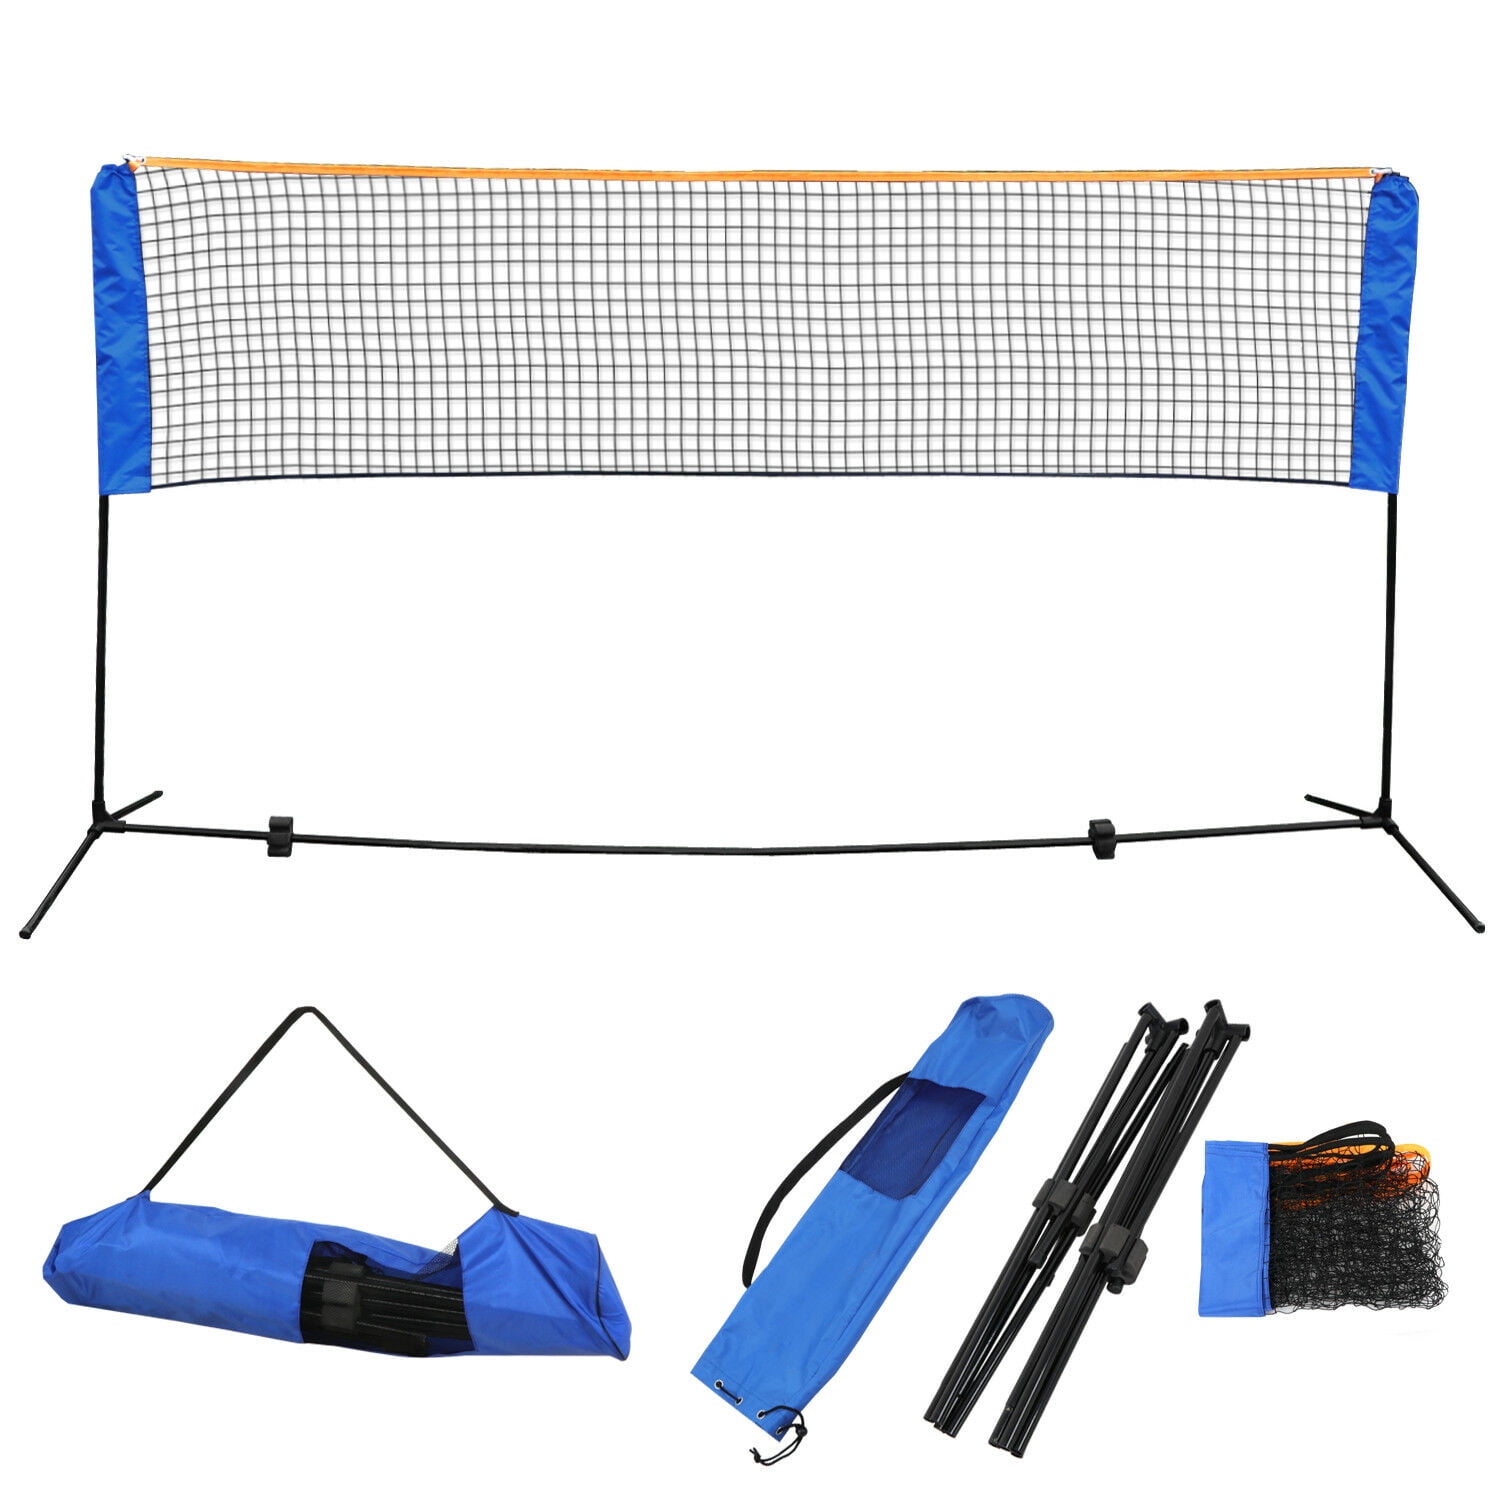 BenefitUSA Portable 3-in-1 Volleyball Tennis Badminton Net Set Training Beach with Carrying Bag 20 L